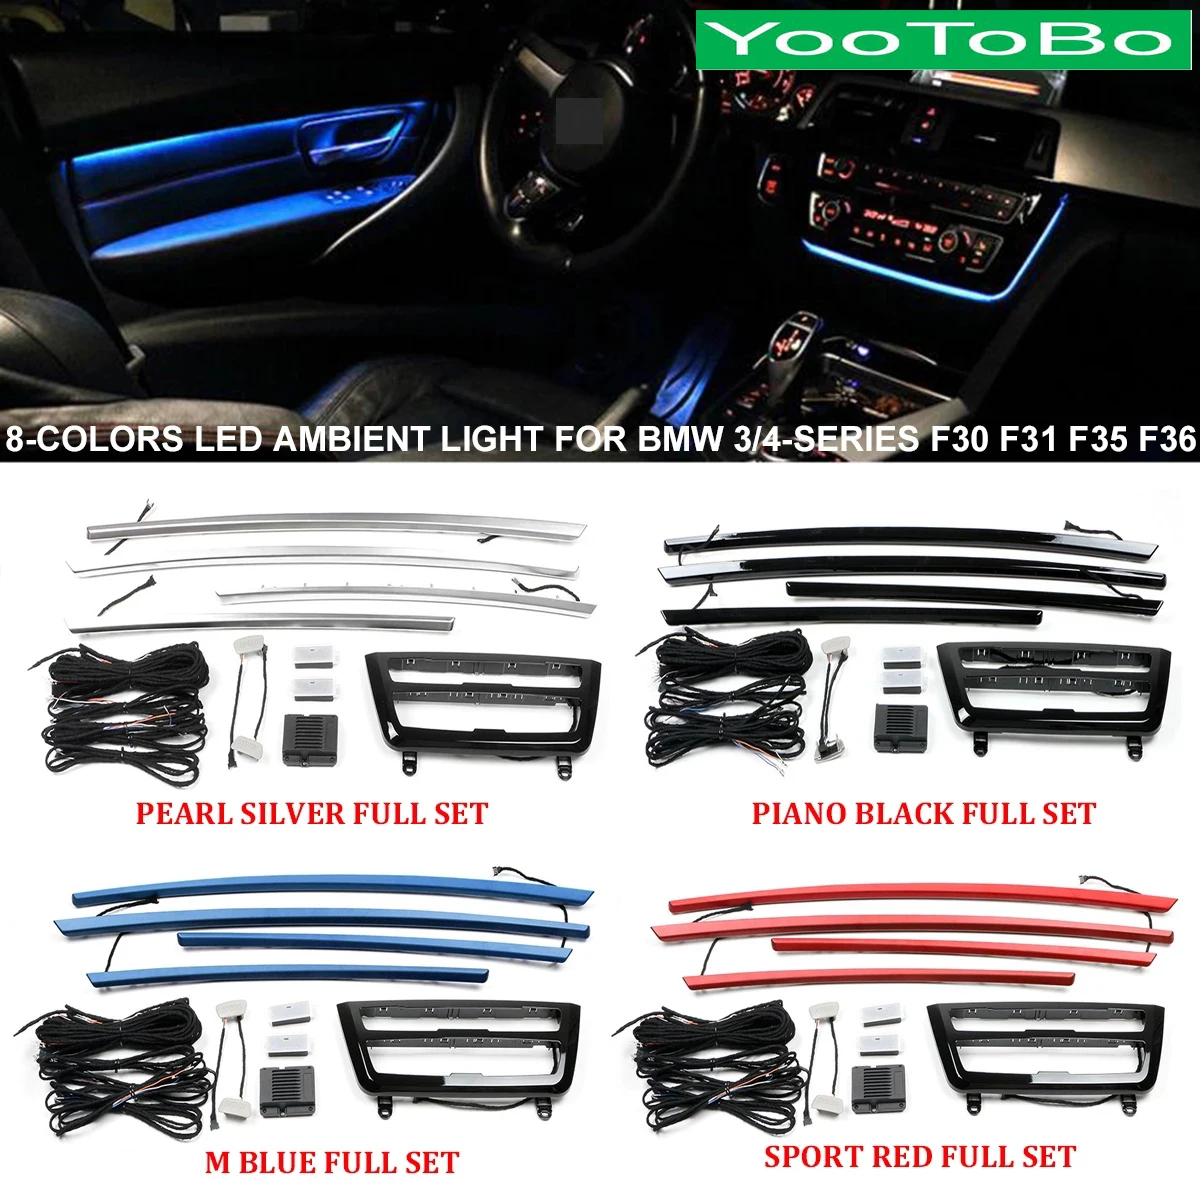 

8-Colors Car Radio Console Dashboard AC Panel 4 Doors LED Ambient Light Footwell Atmosphere Lamp For BMW 3/4-Series F30 F31 F36